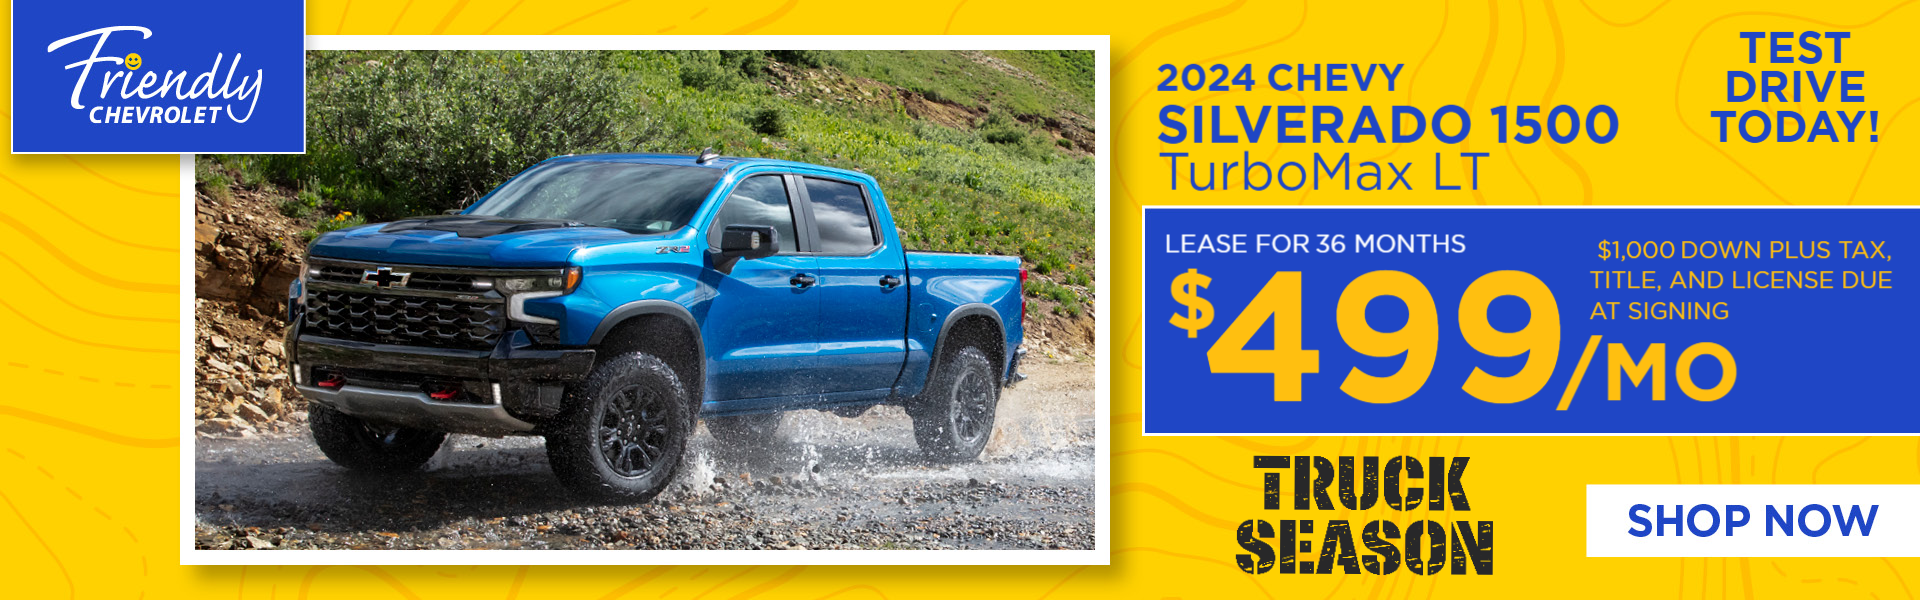 Lease a New Chevy Silverado for $499 per month